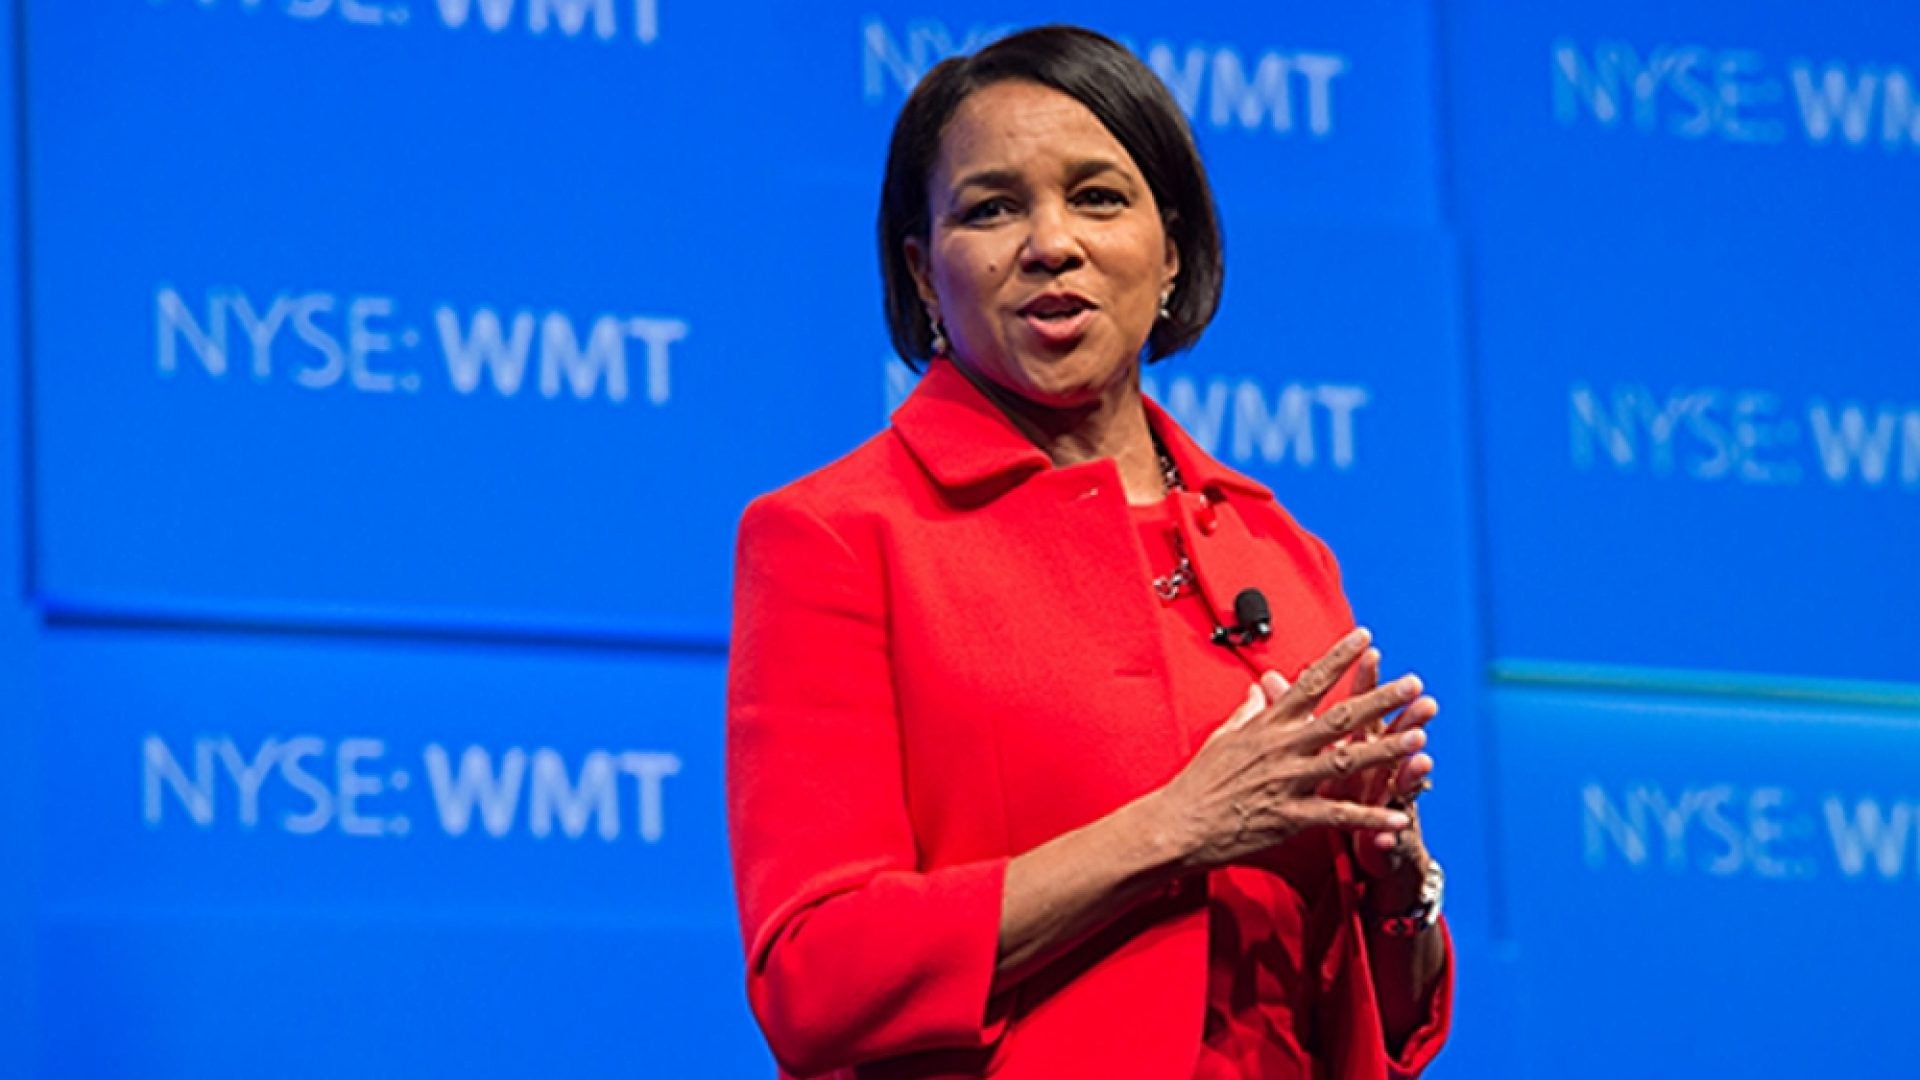 Rosalind Brewer’s Move To Walgreens Makes Her The Only Black Woman To Lead A Fortune 500 Company